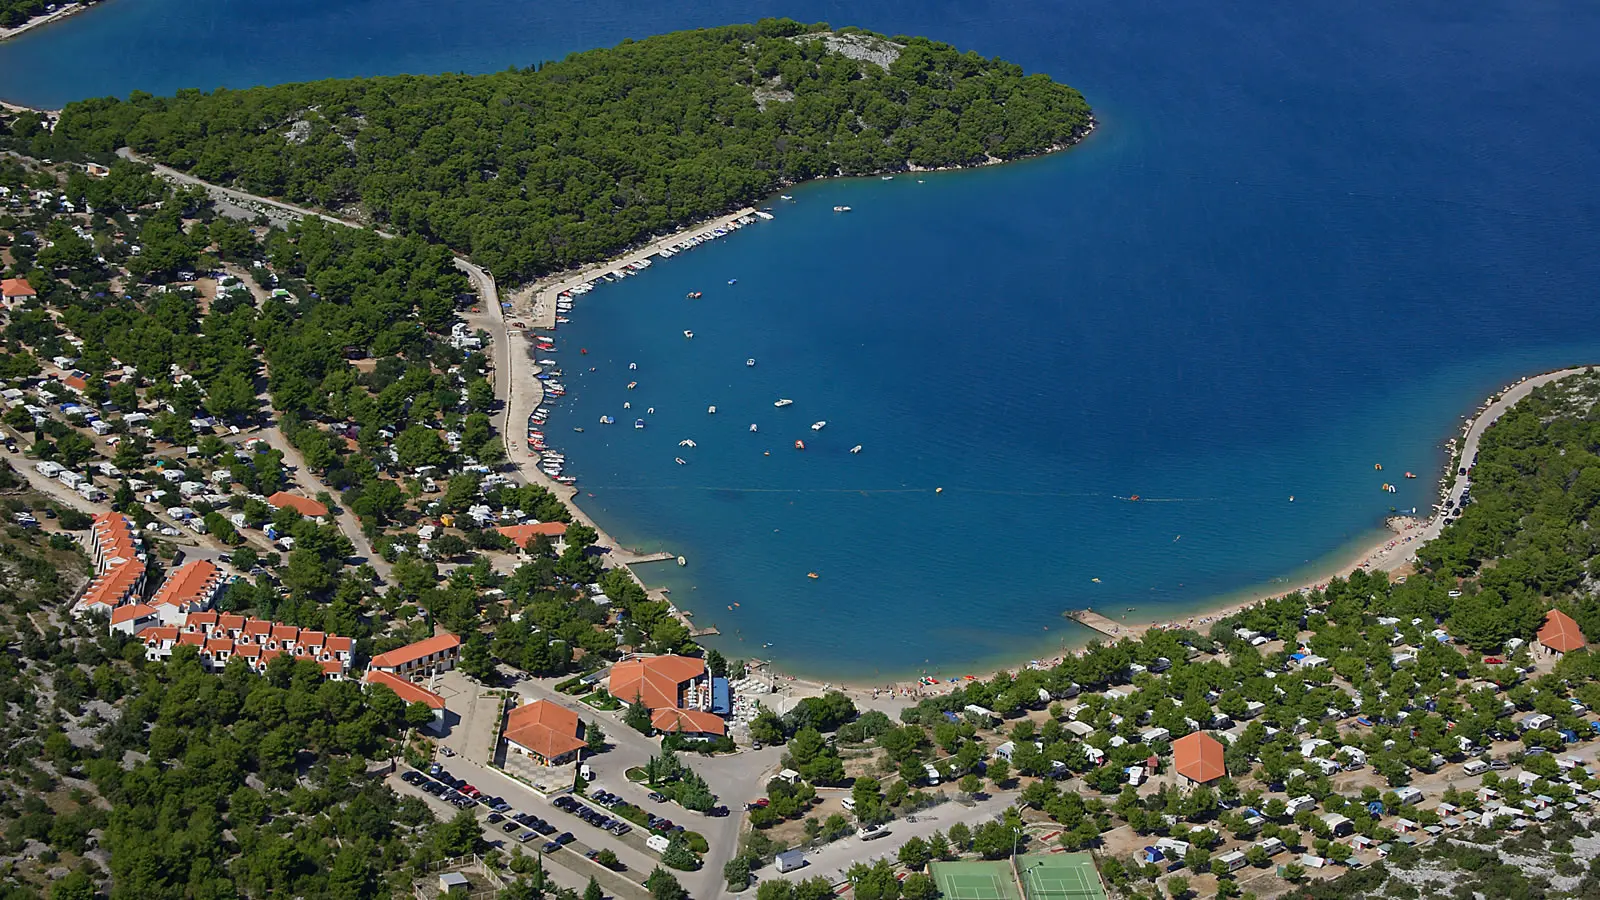 Aerial view of a holiday resort in Jezera, Murter with rows of mobile homes nestled among green trees, adjacent to a serene beach with moored boats in the bay